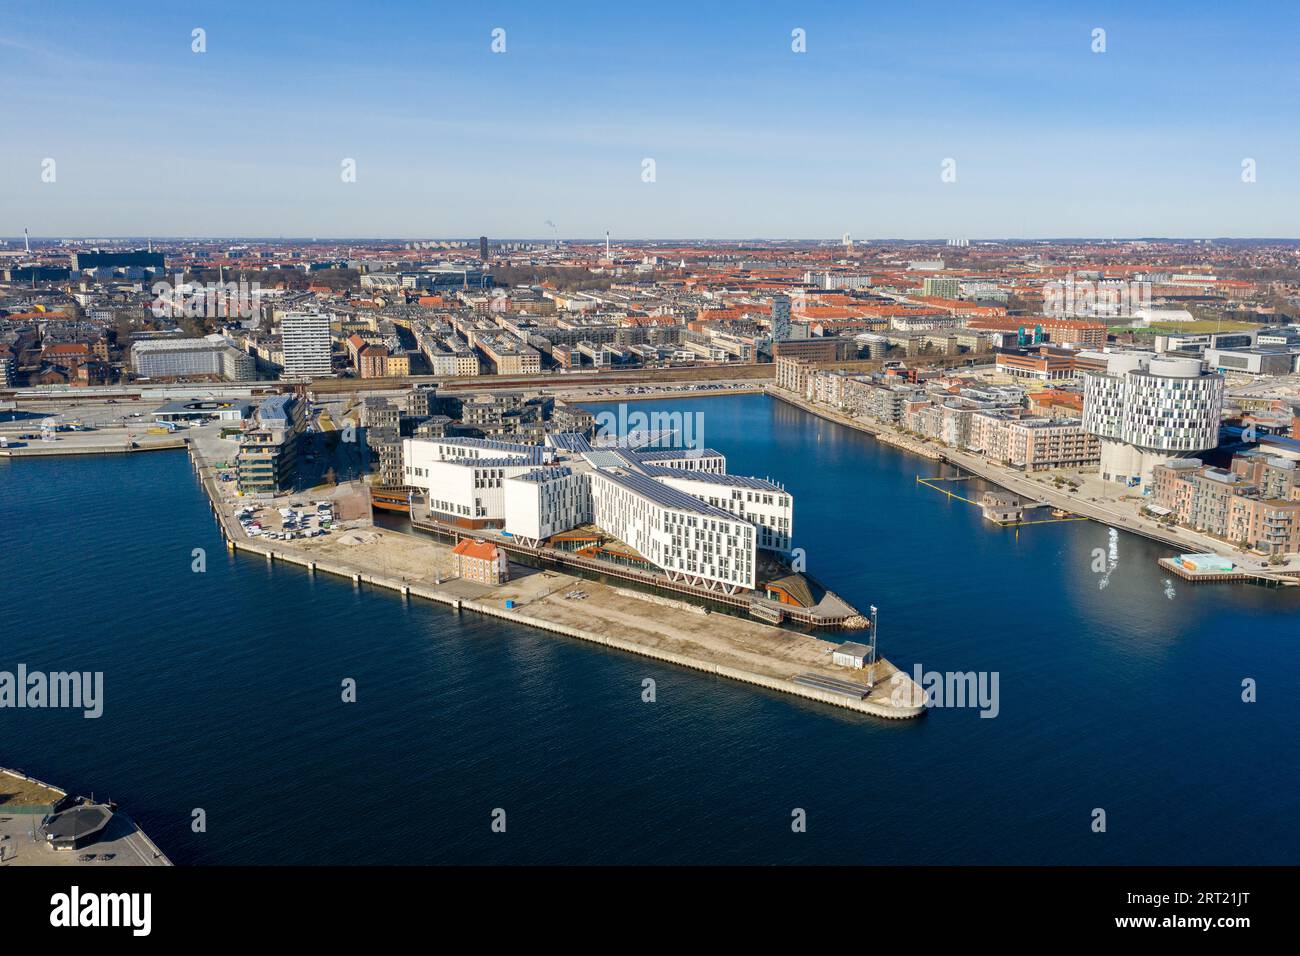 Copenhagen, Denmark, March 09, 2021: Aerial drone view of the UN City builing Stock Photo